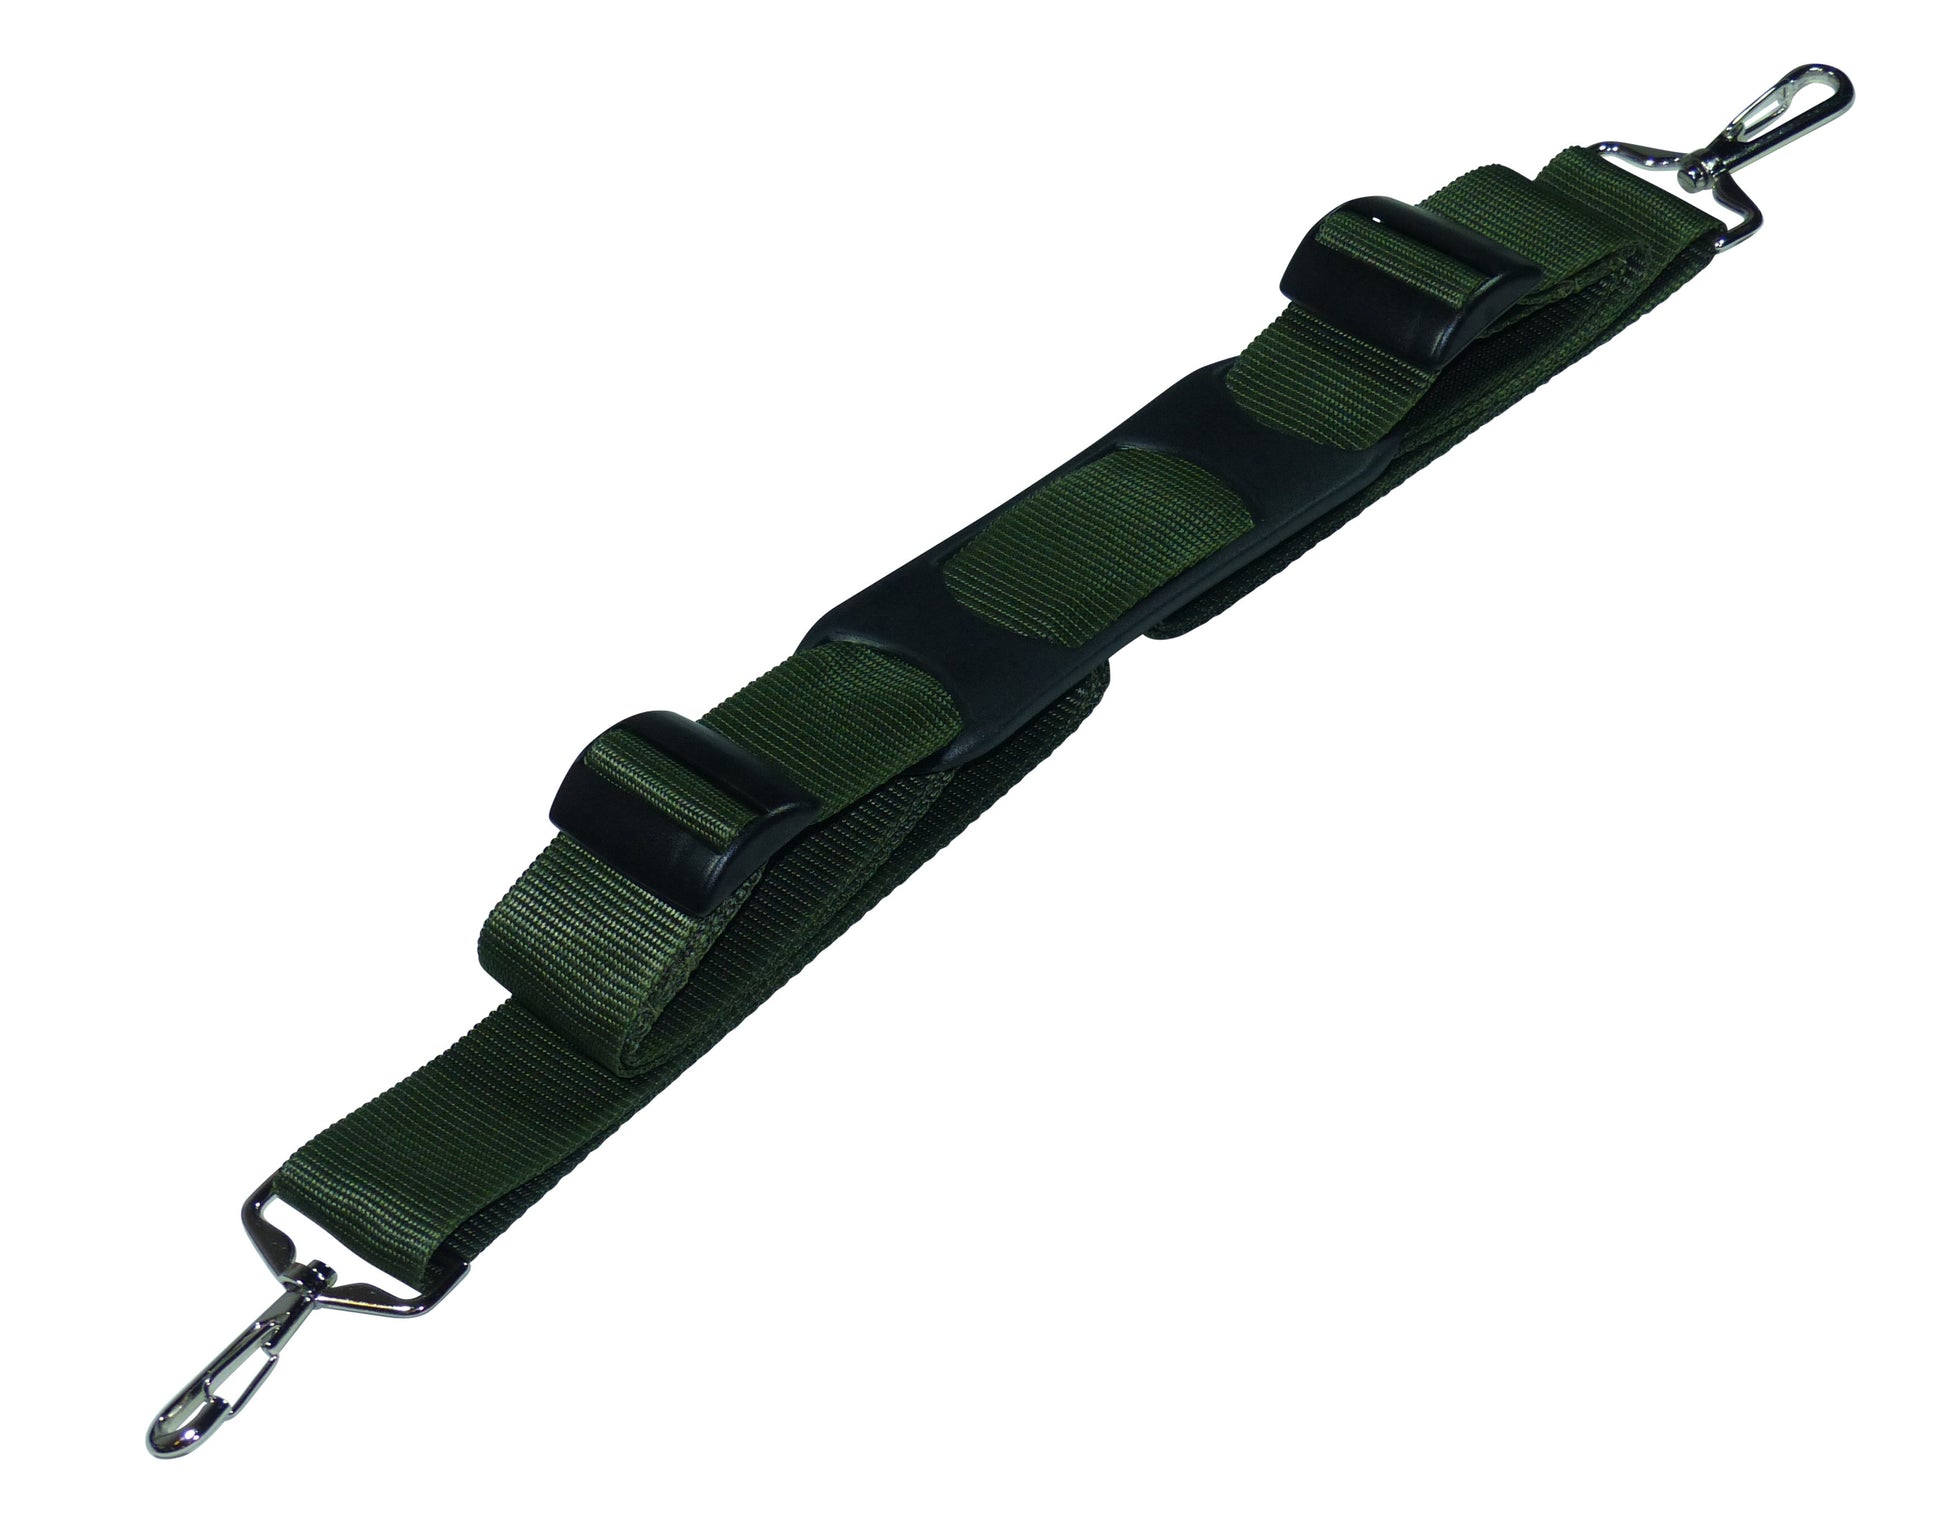 38mm Bag Strap with Metal Buckles and Shoulder Pad, 150cm in olive green